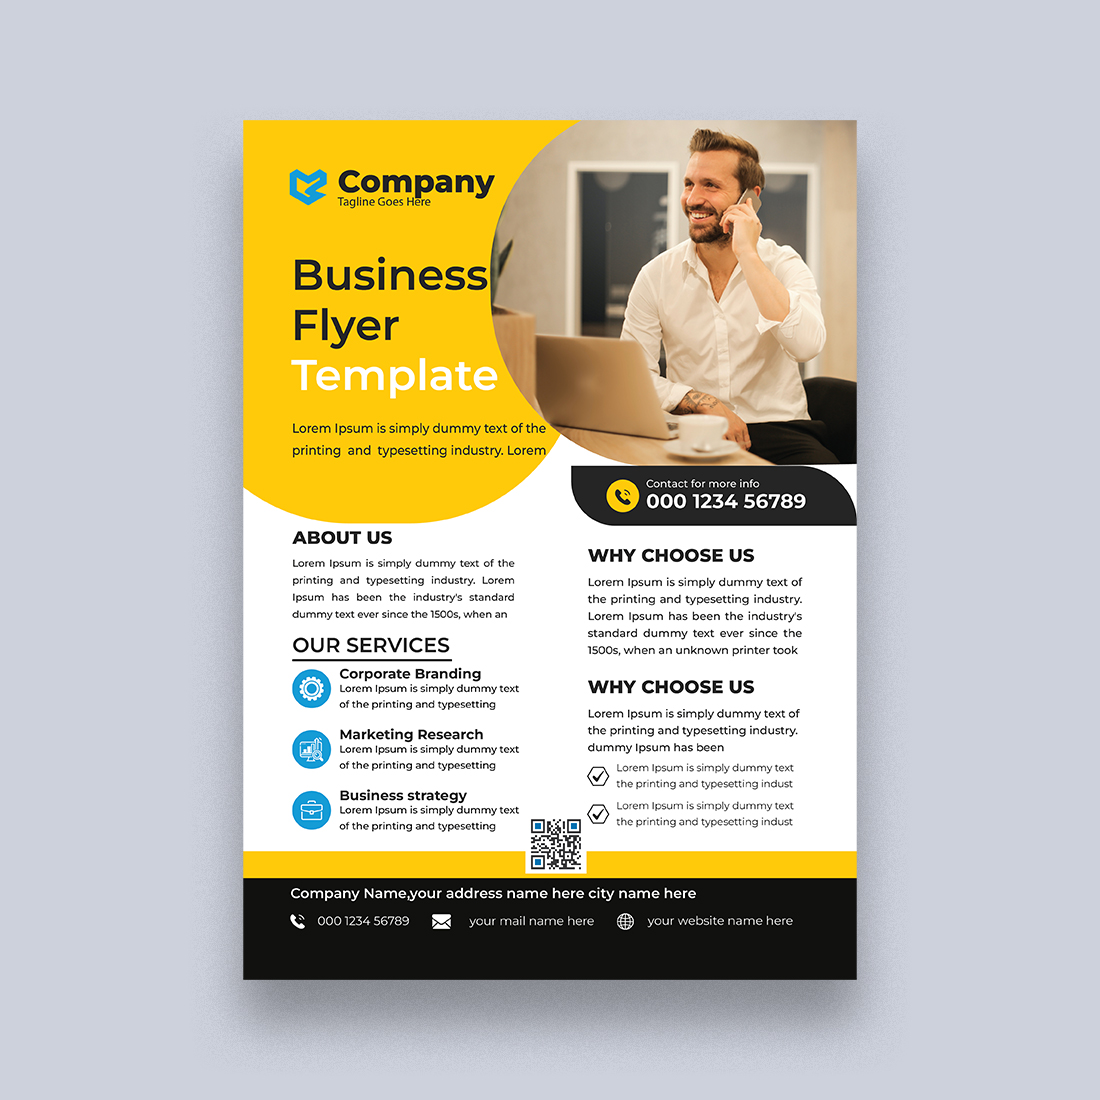 Corporate Flyer design Template cover image.